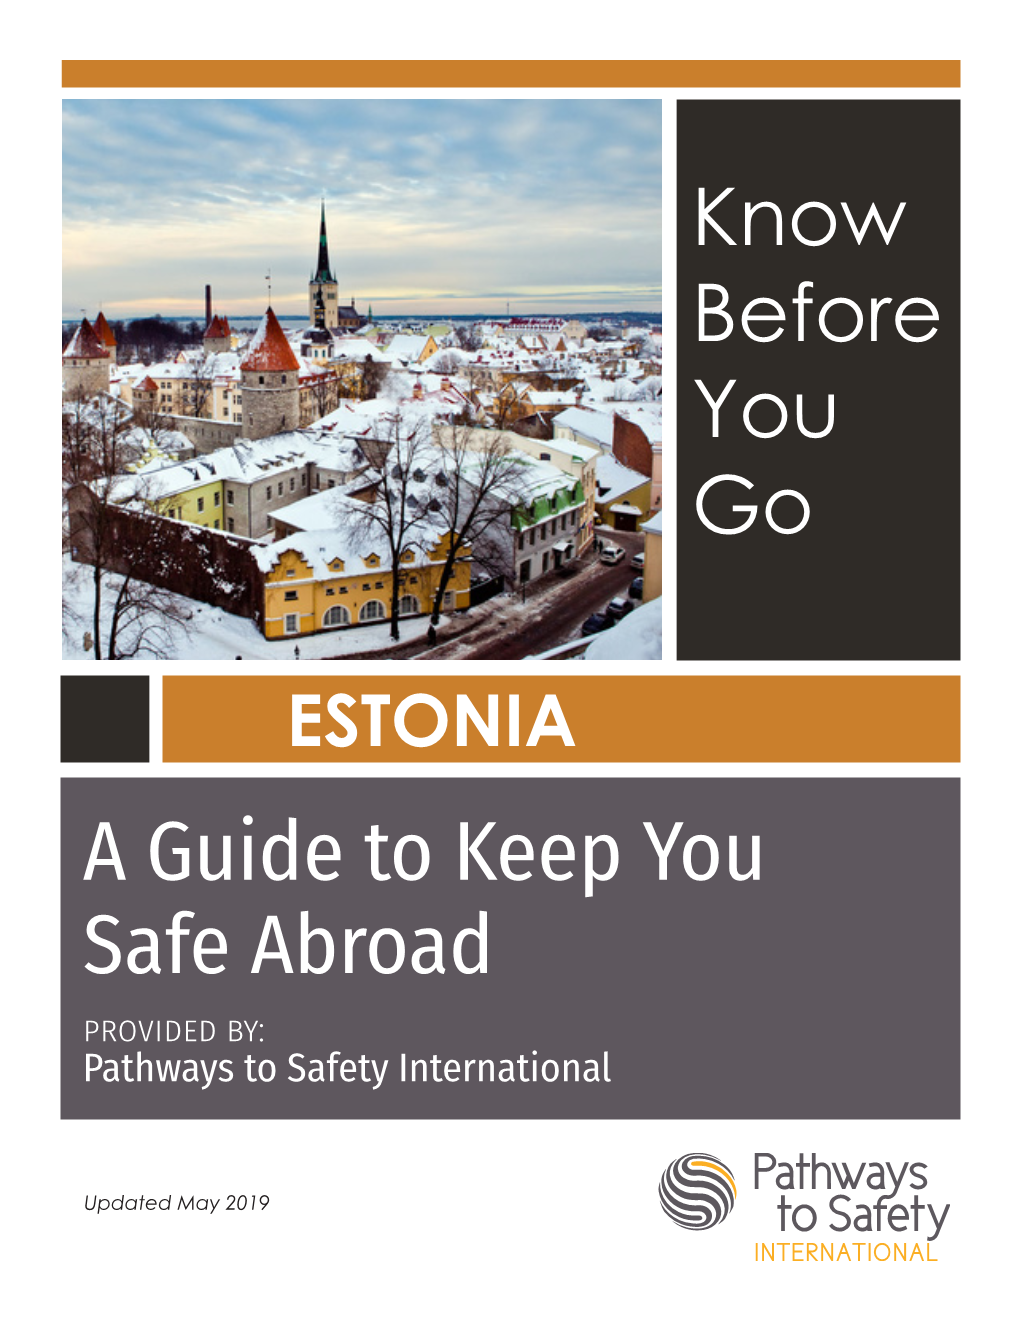 A Guide to Keep You Safe Abroad Provided By: Pathways to Safety International